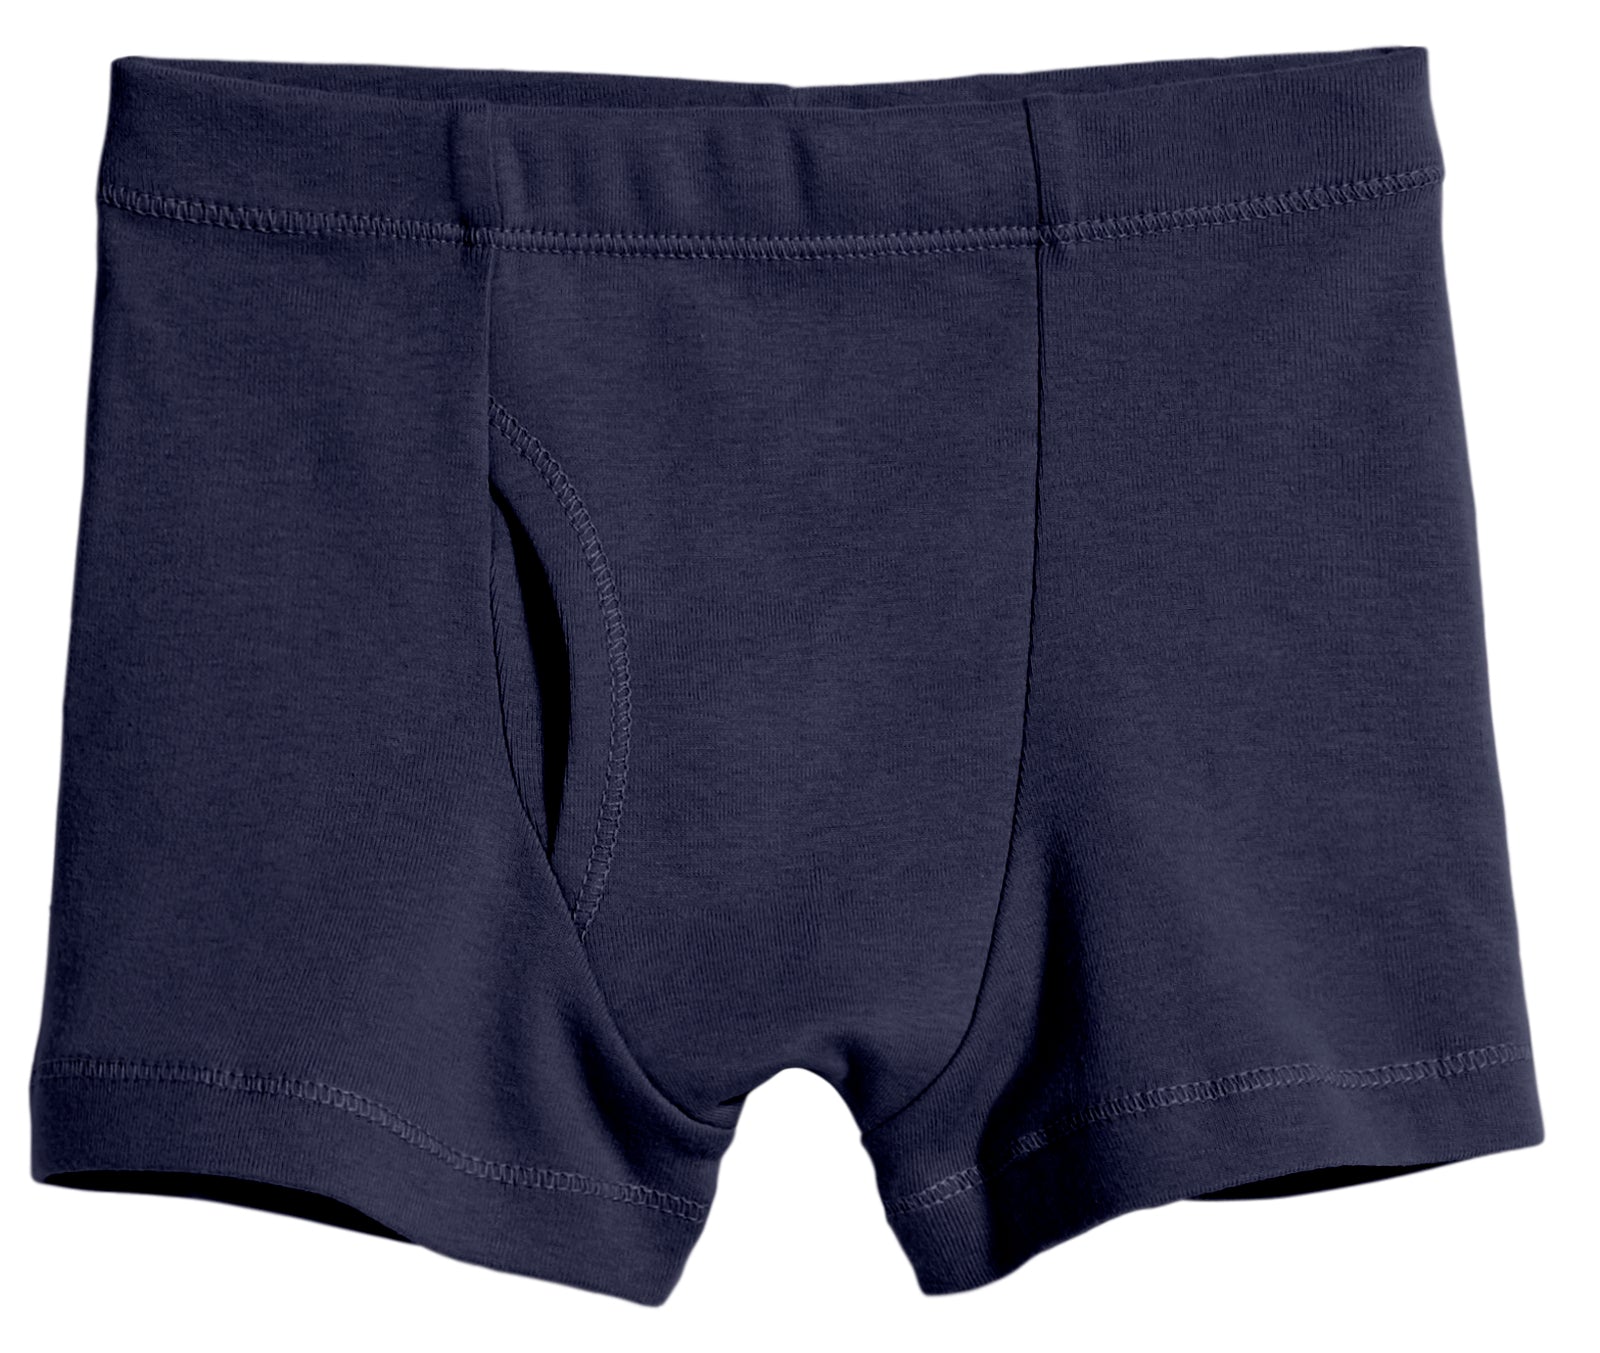 Soft boxers briefs, without itchy seams or labels.From organic